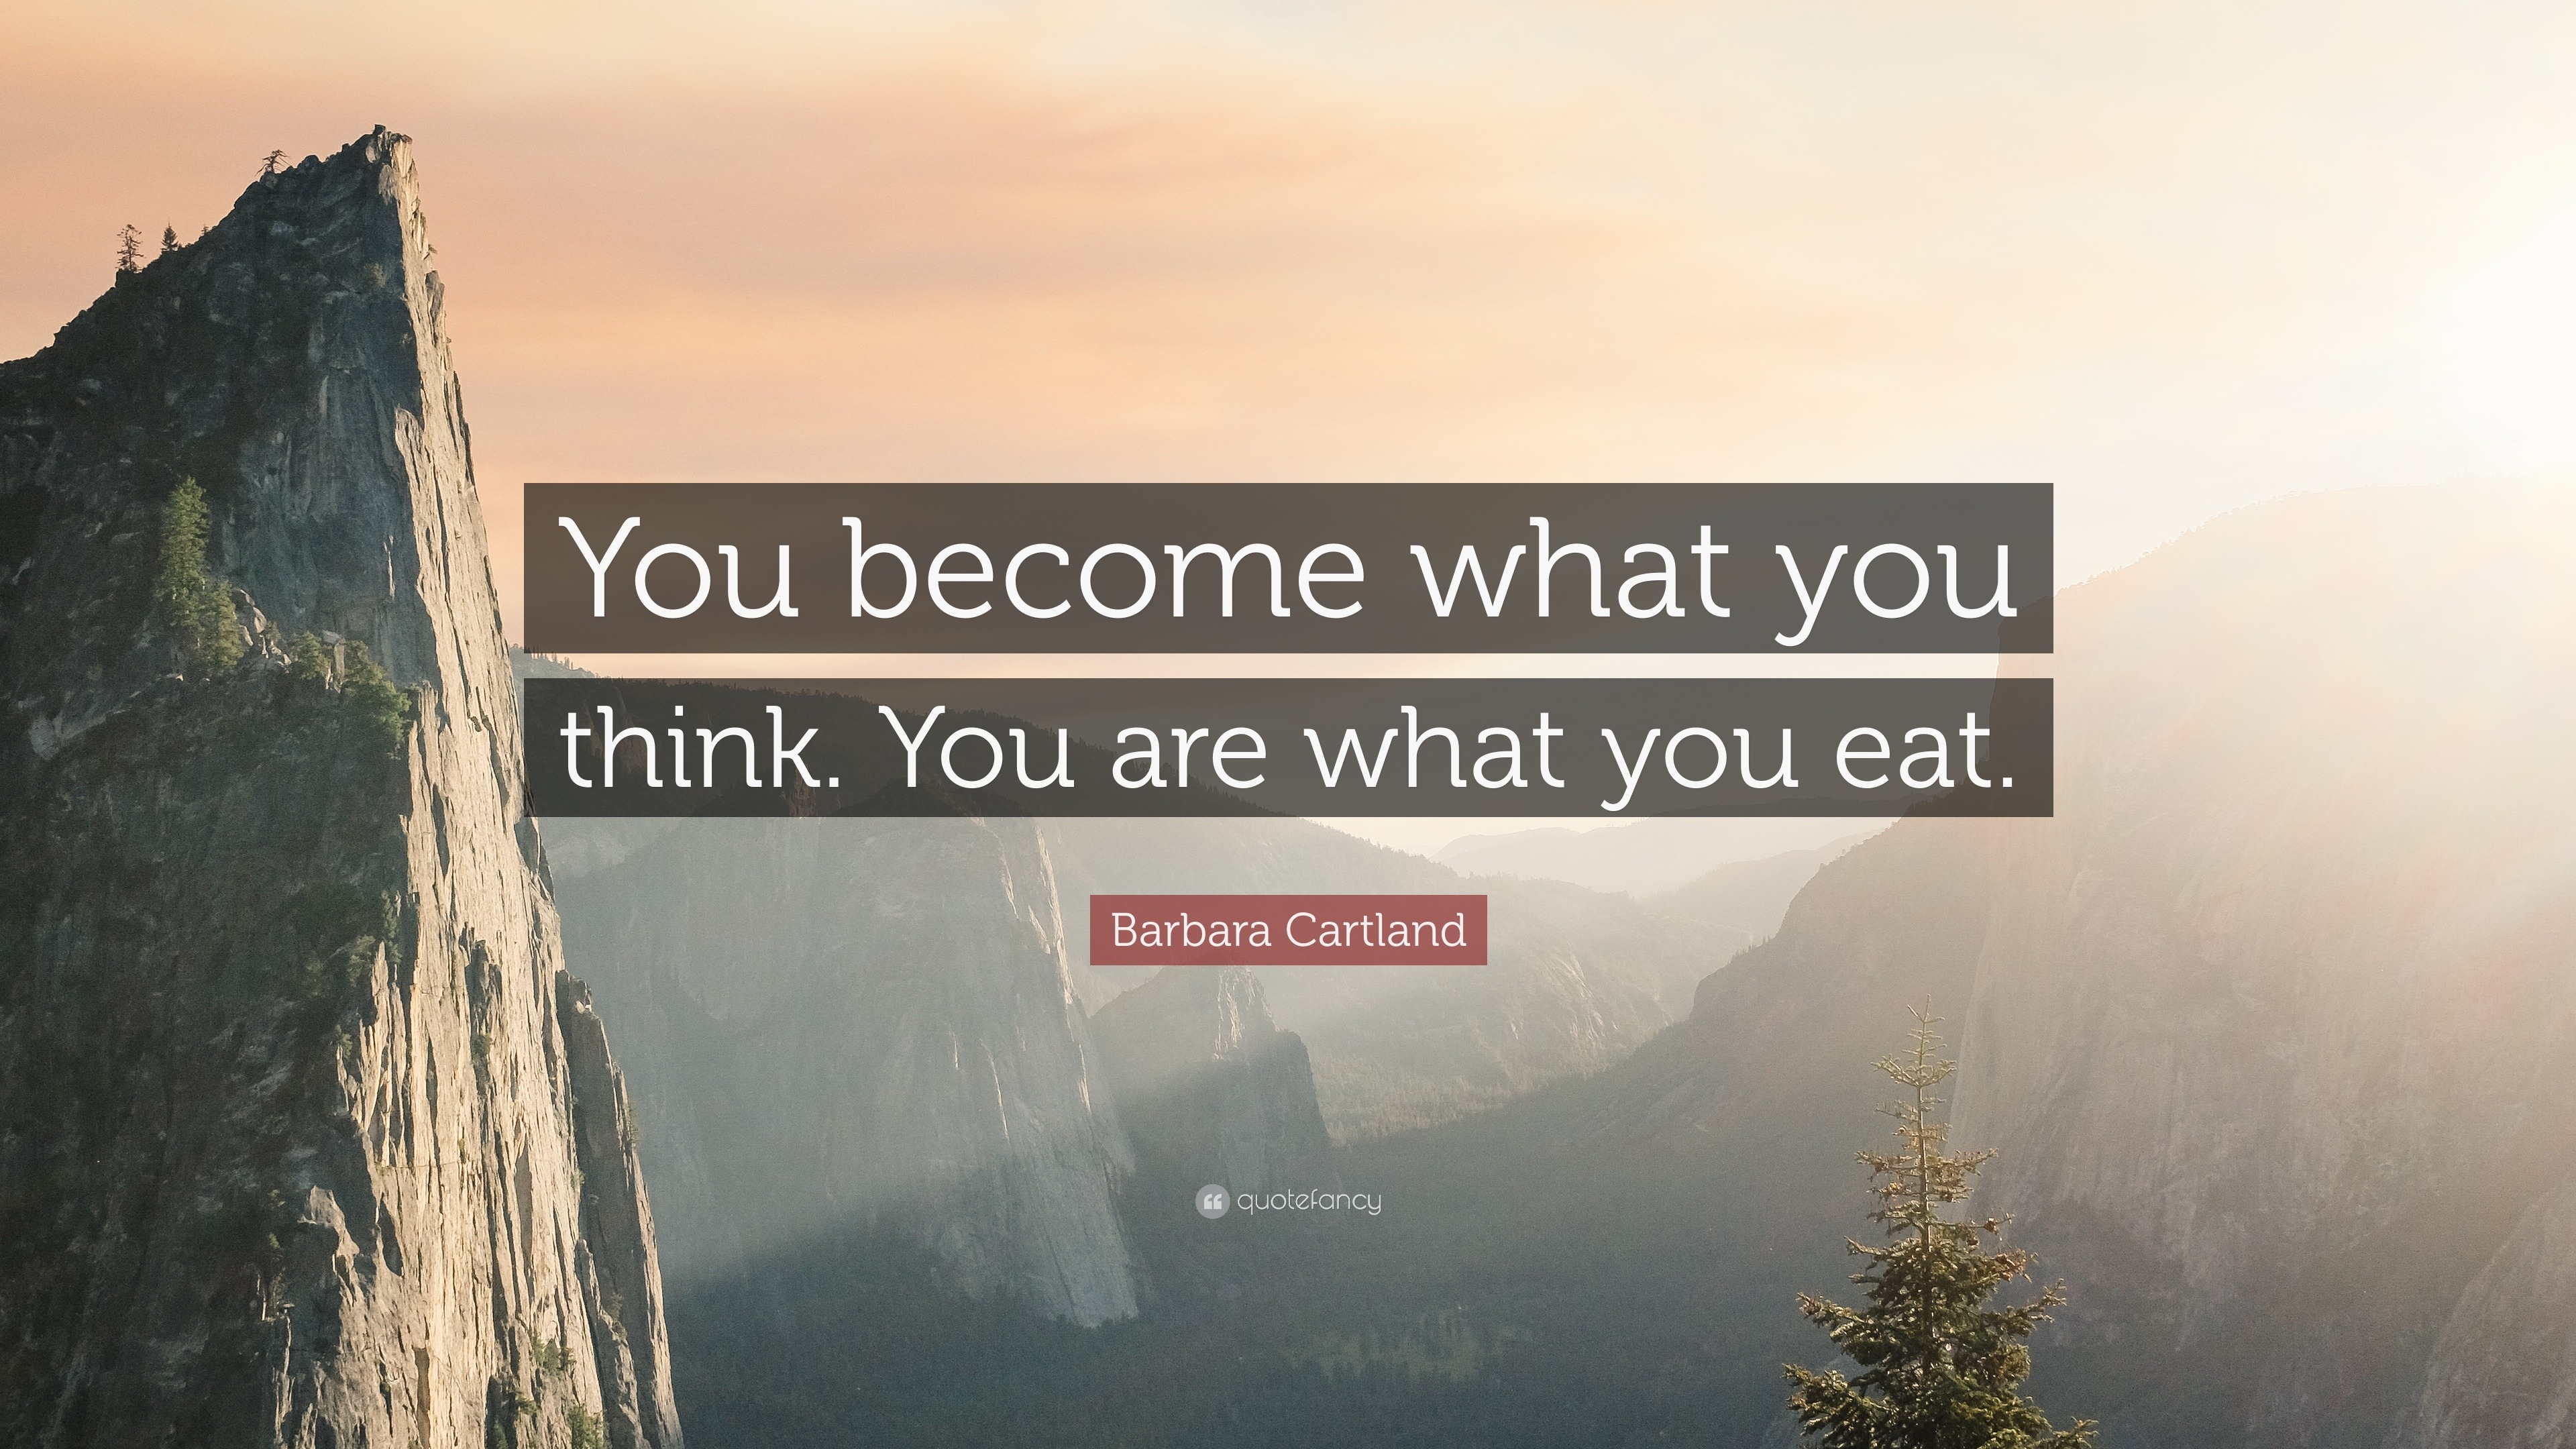 Barbara Cartland Quote “you Become What You Think You Are What You Eat” 3551